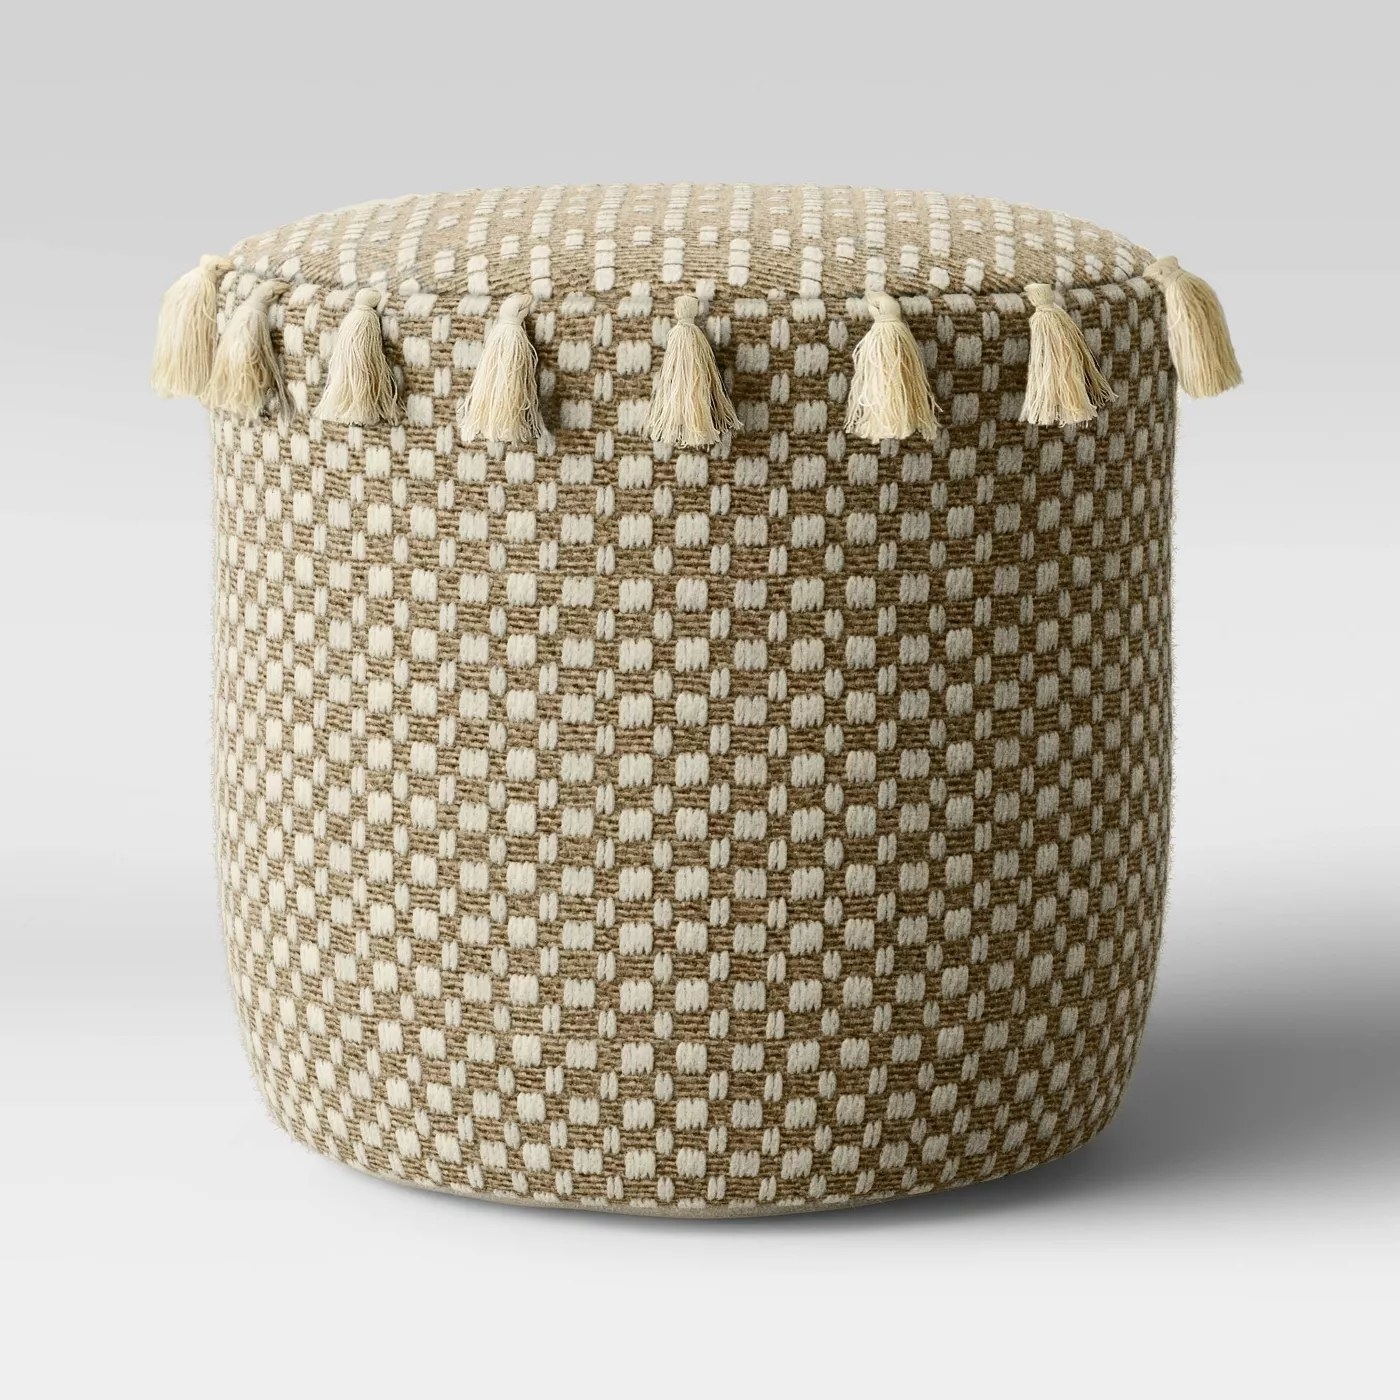 The natural tassels pouf